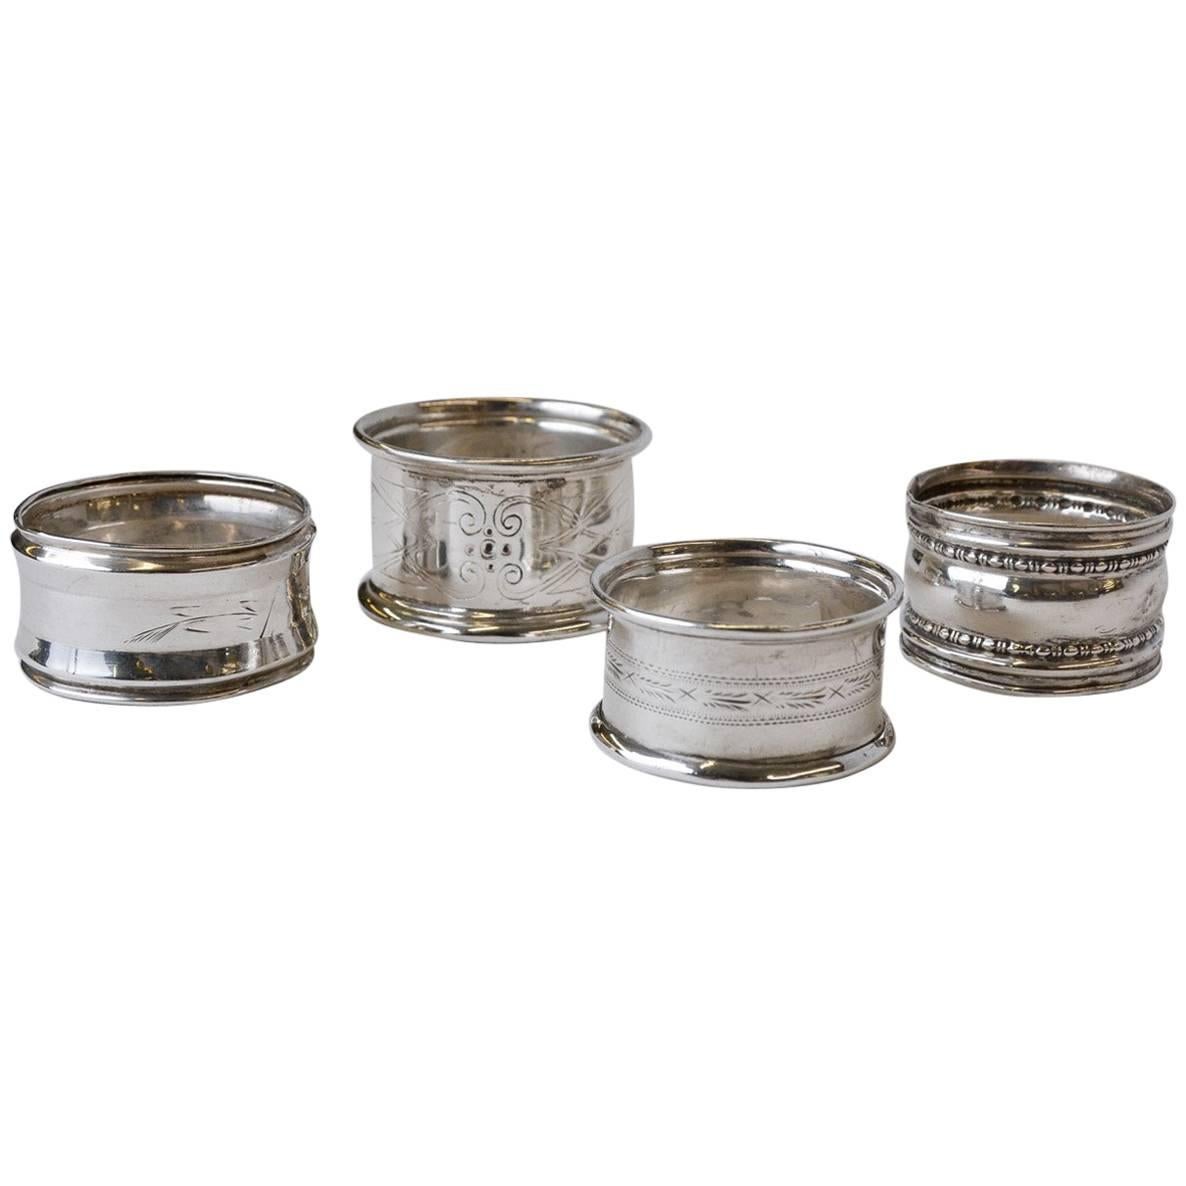 Collection of Four English Antique Silver Napkin Rings